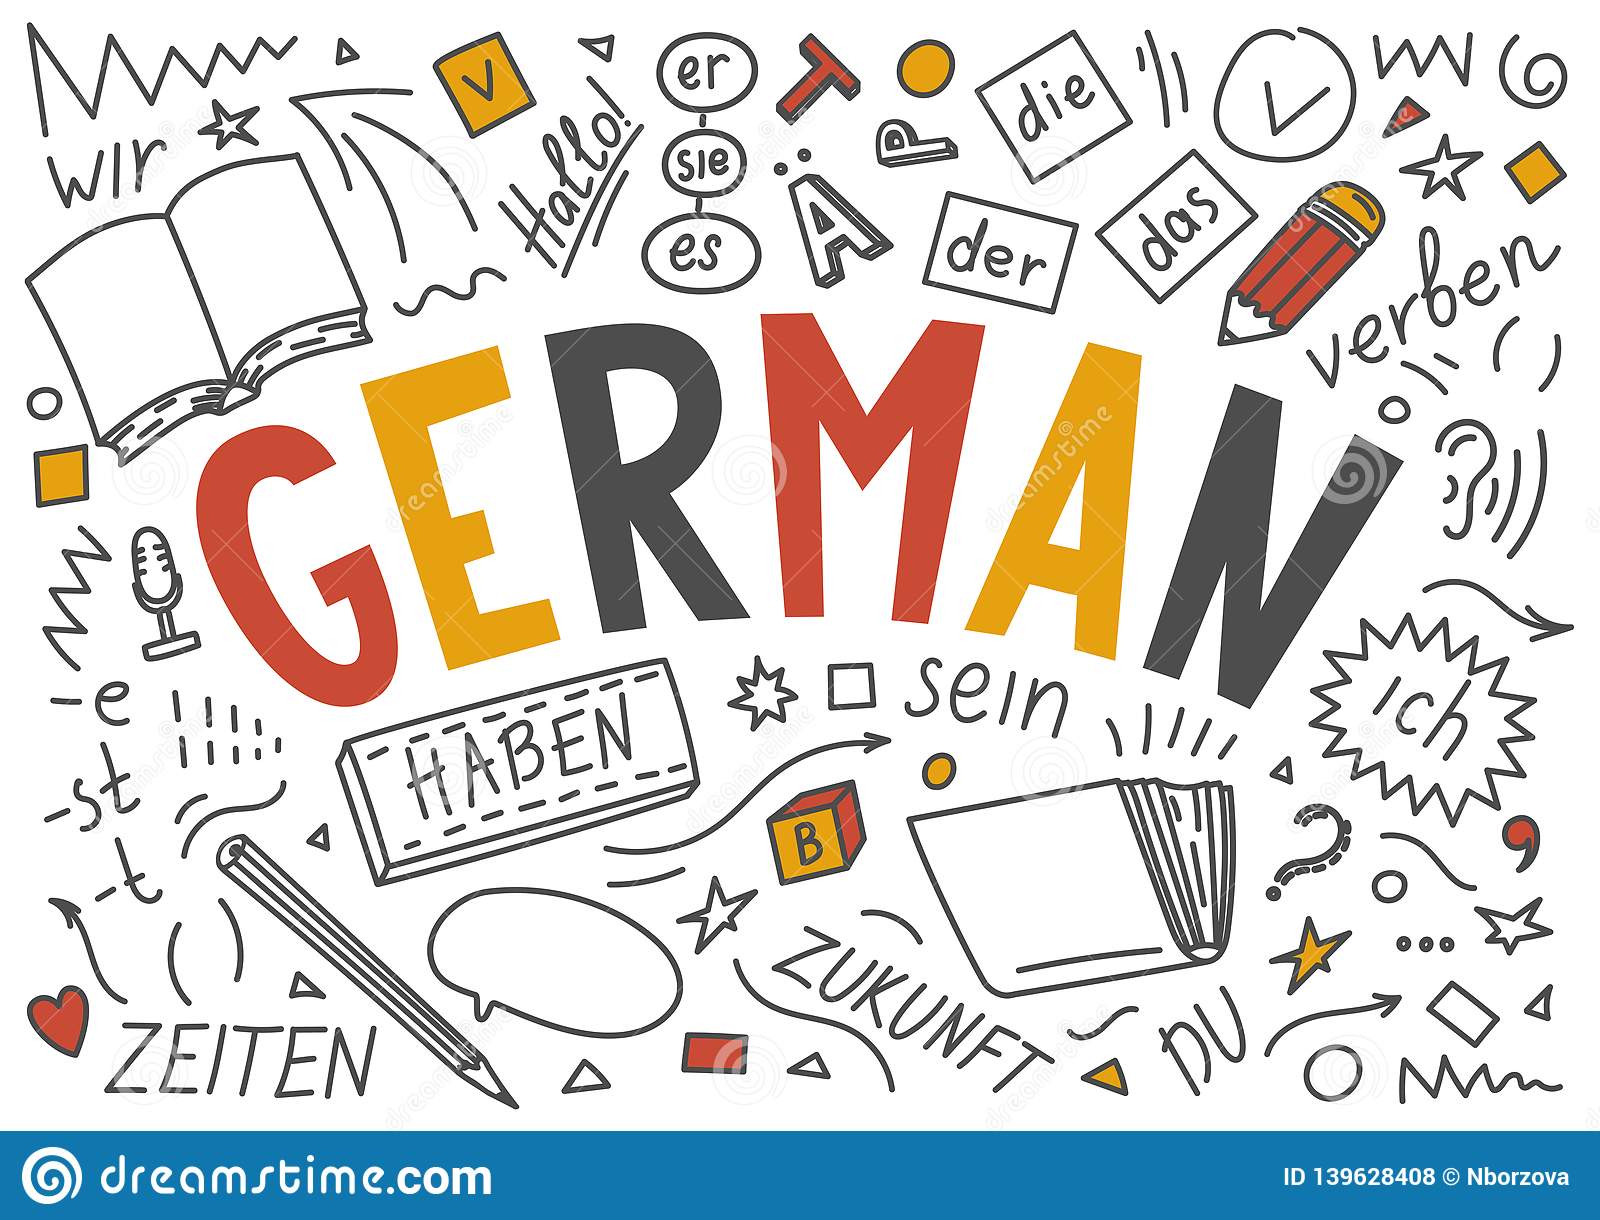 german-language-hand-drawn-doodles-lettering-white-background-139628408